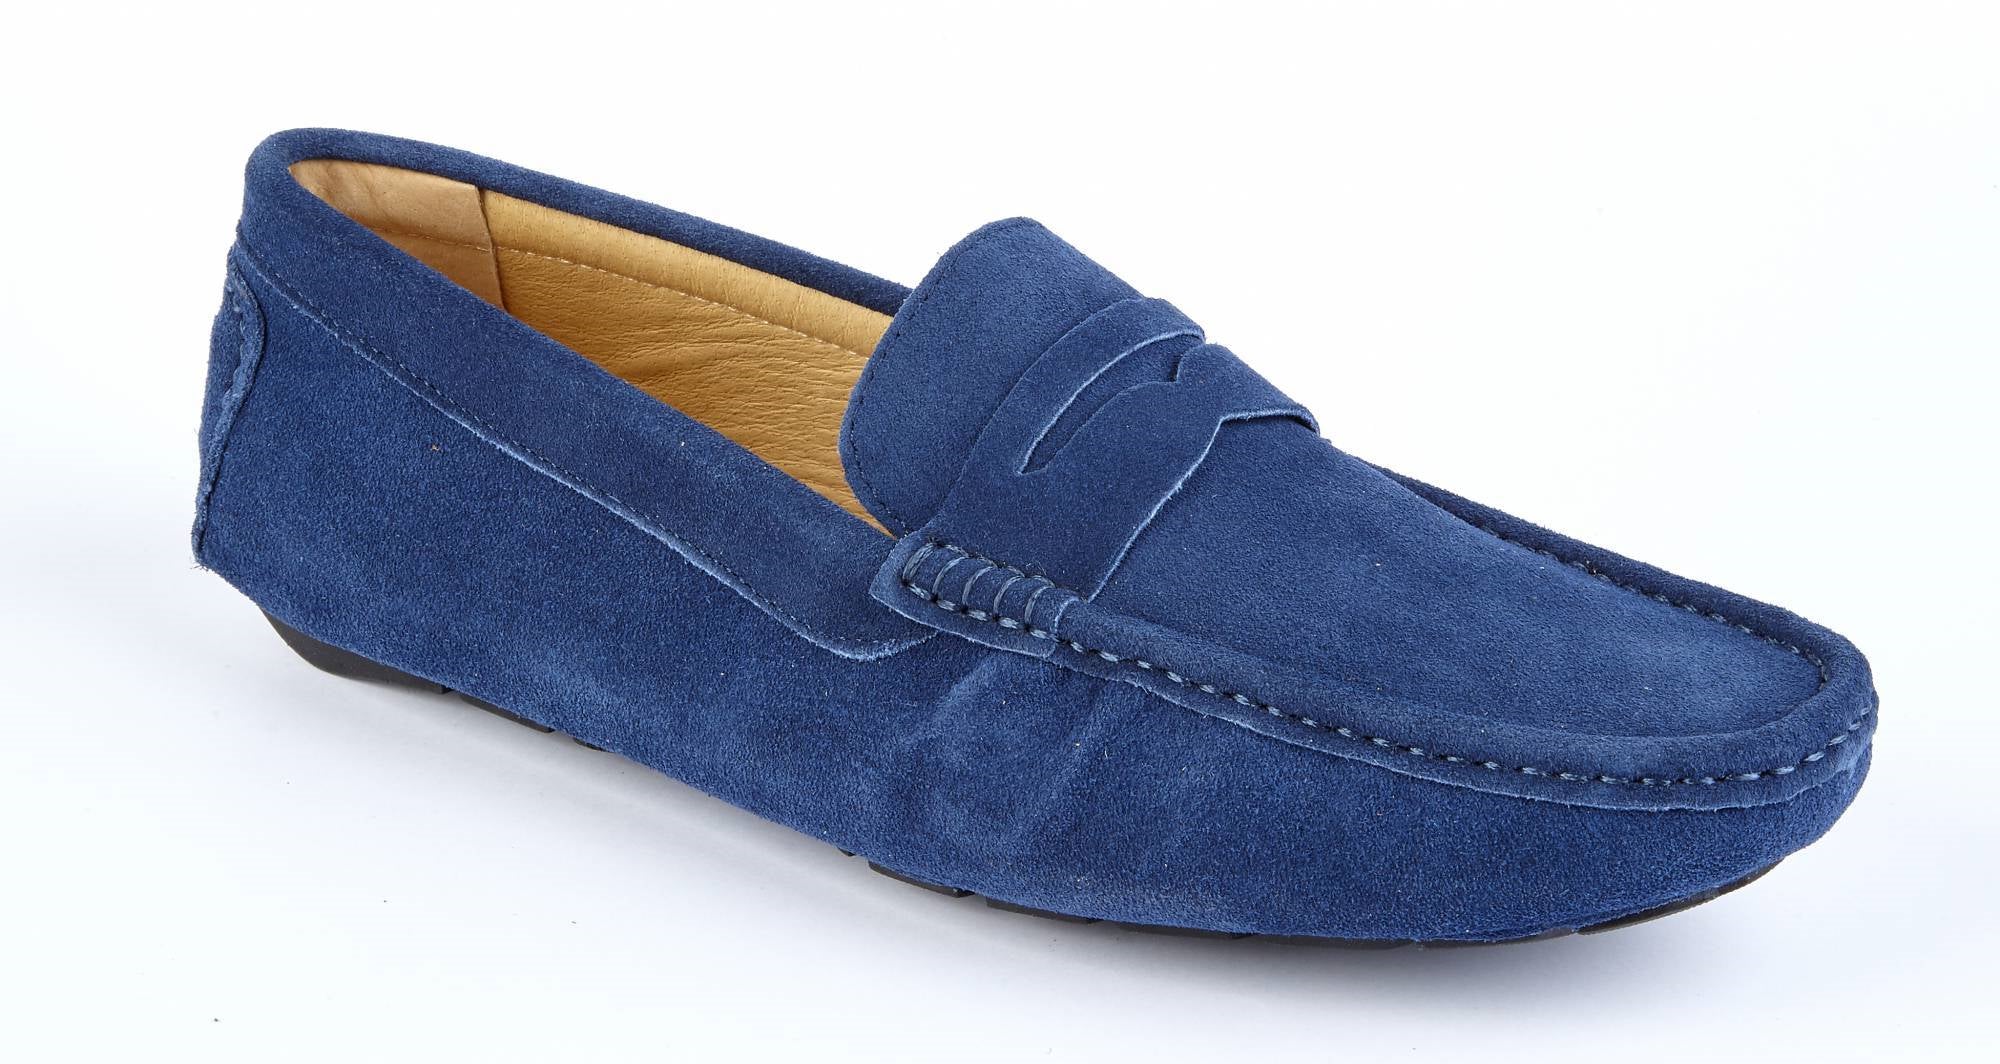 NAVY LEATHER DRIVING SHOES
